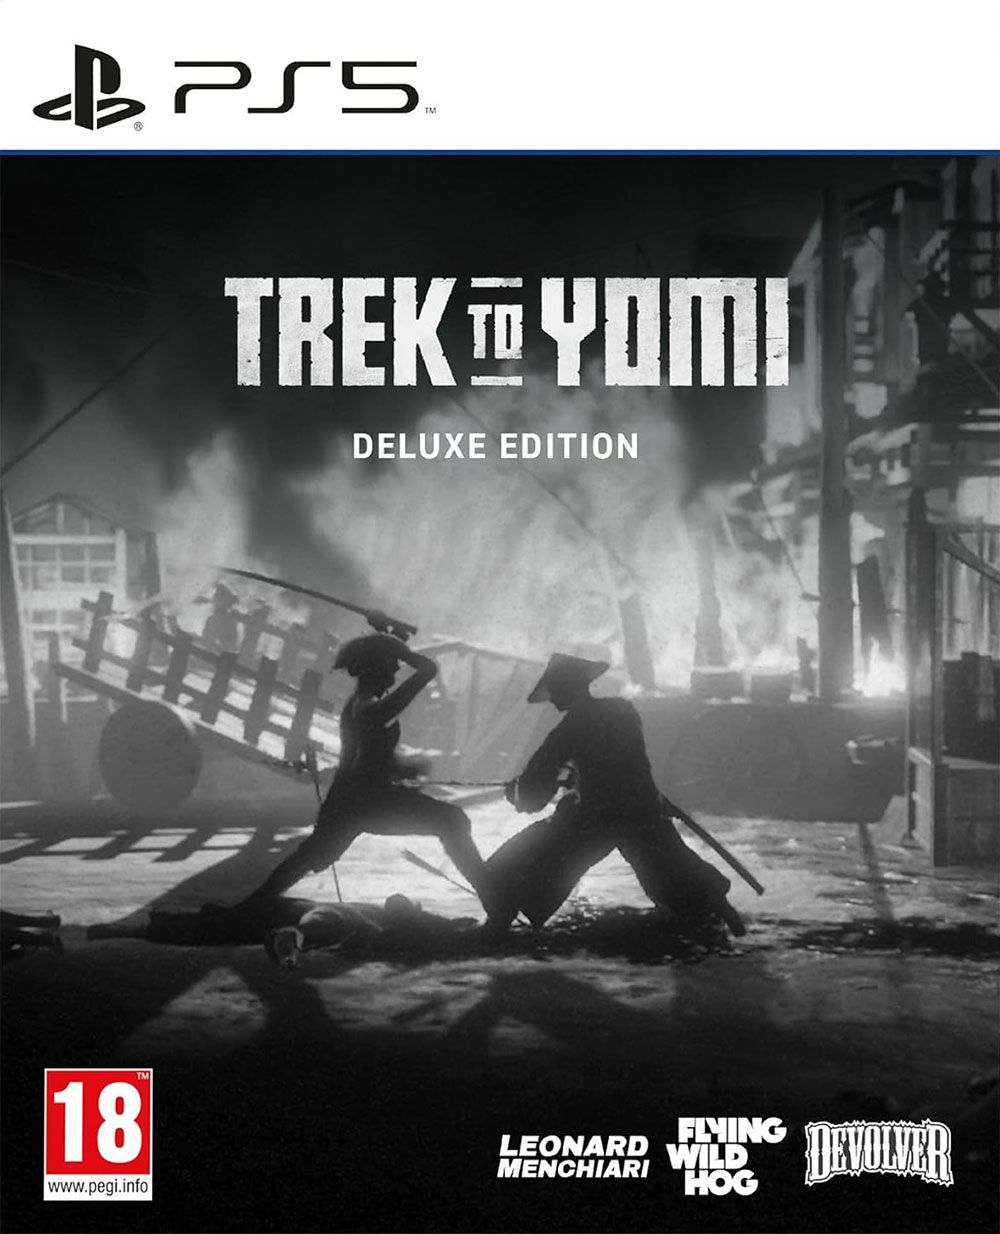 Trek to Yomi - Deluxe Edition (PS5) | PlayStation 5